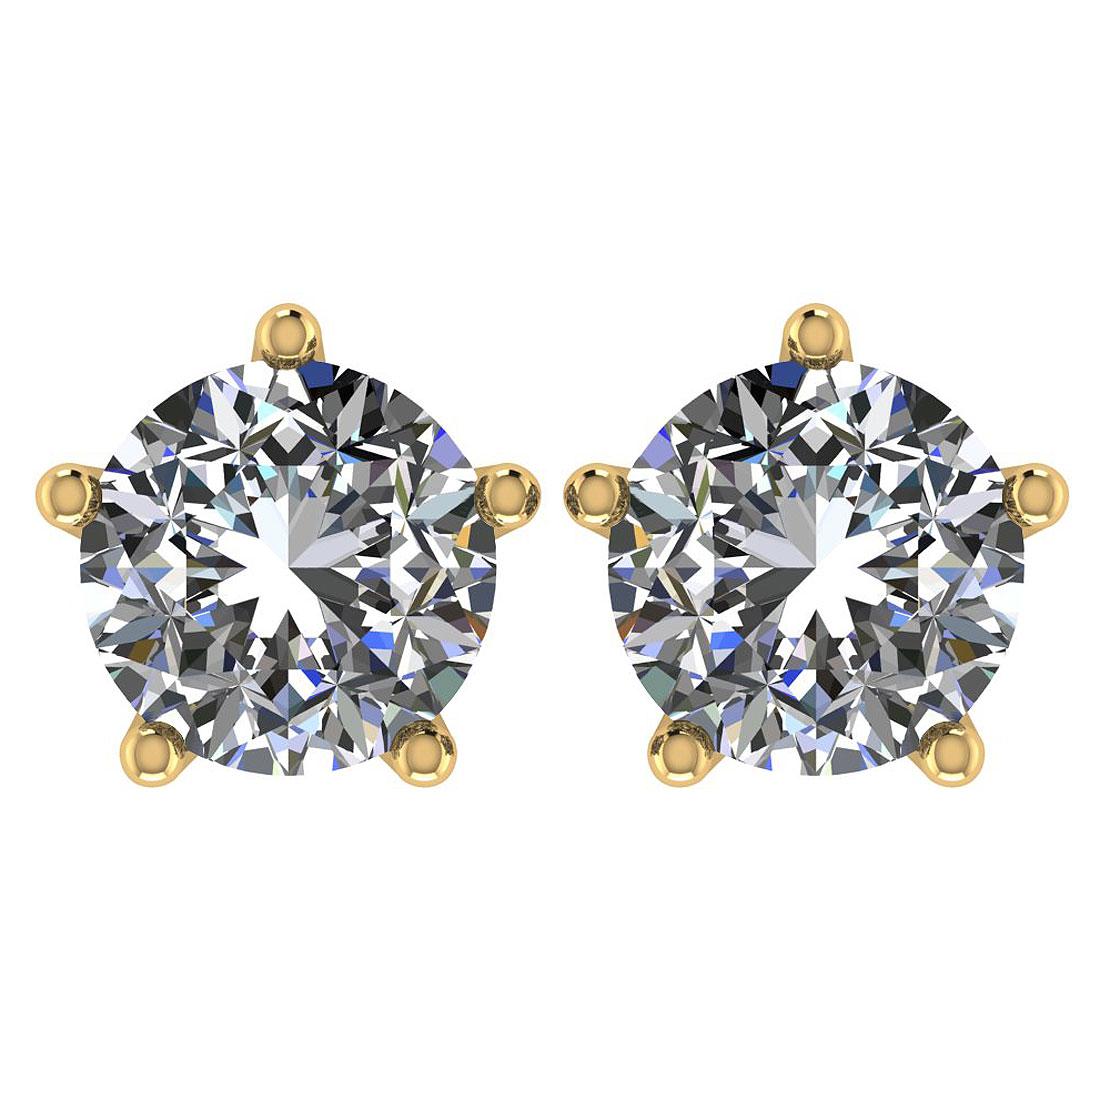 CERTIFIED 1.5 CTW ROUND D/SI2 DIAMOND (LAB GROWN Certified DIAMOND SOLITAIRE EARRINGS ) IN 14K YELLO